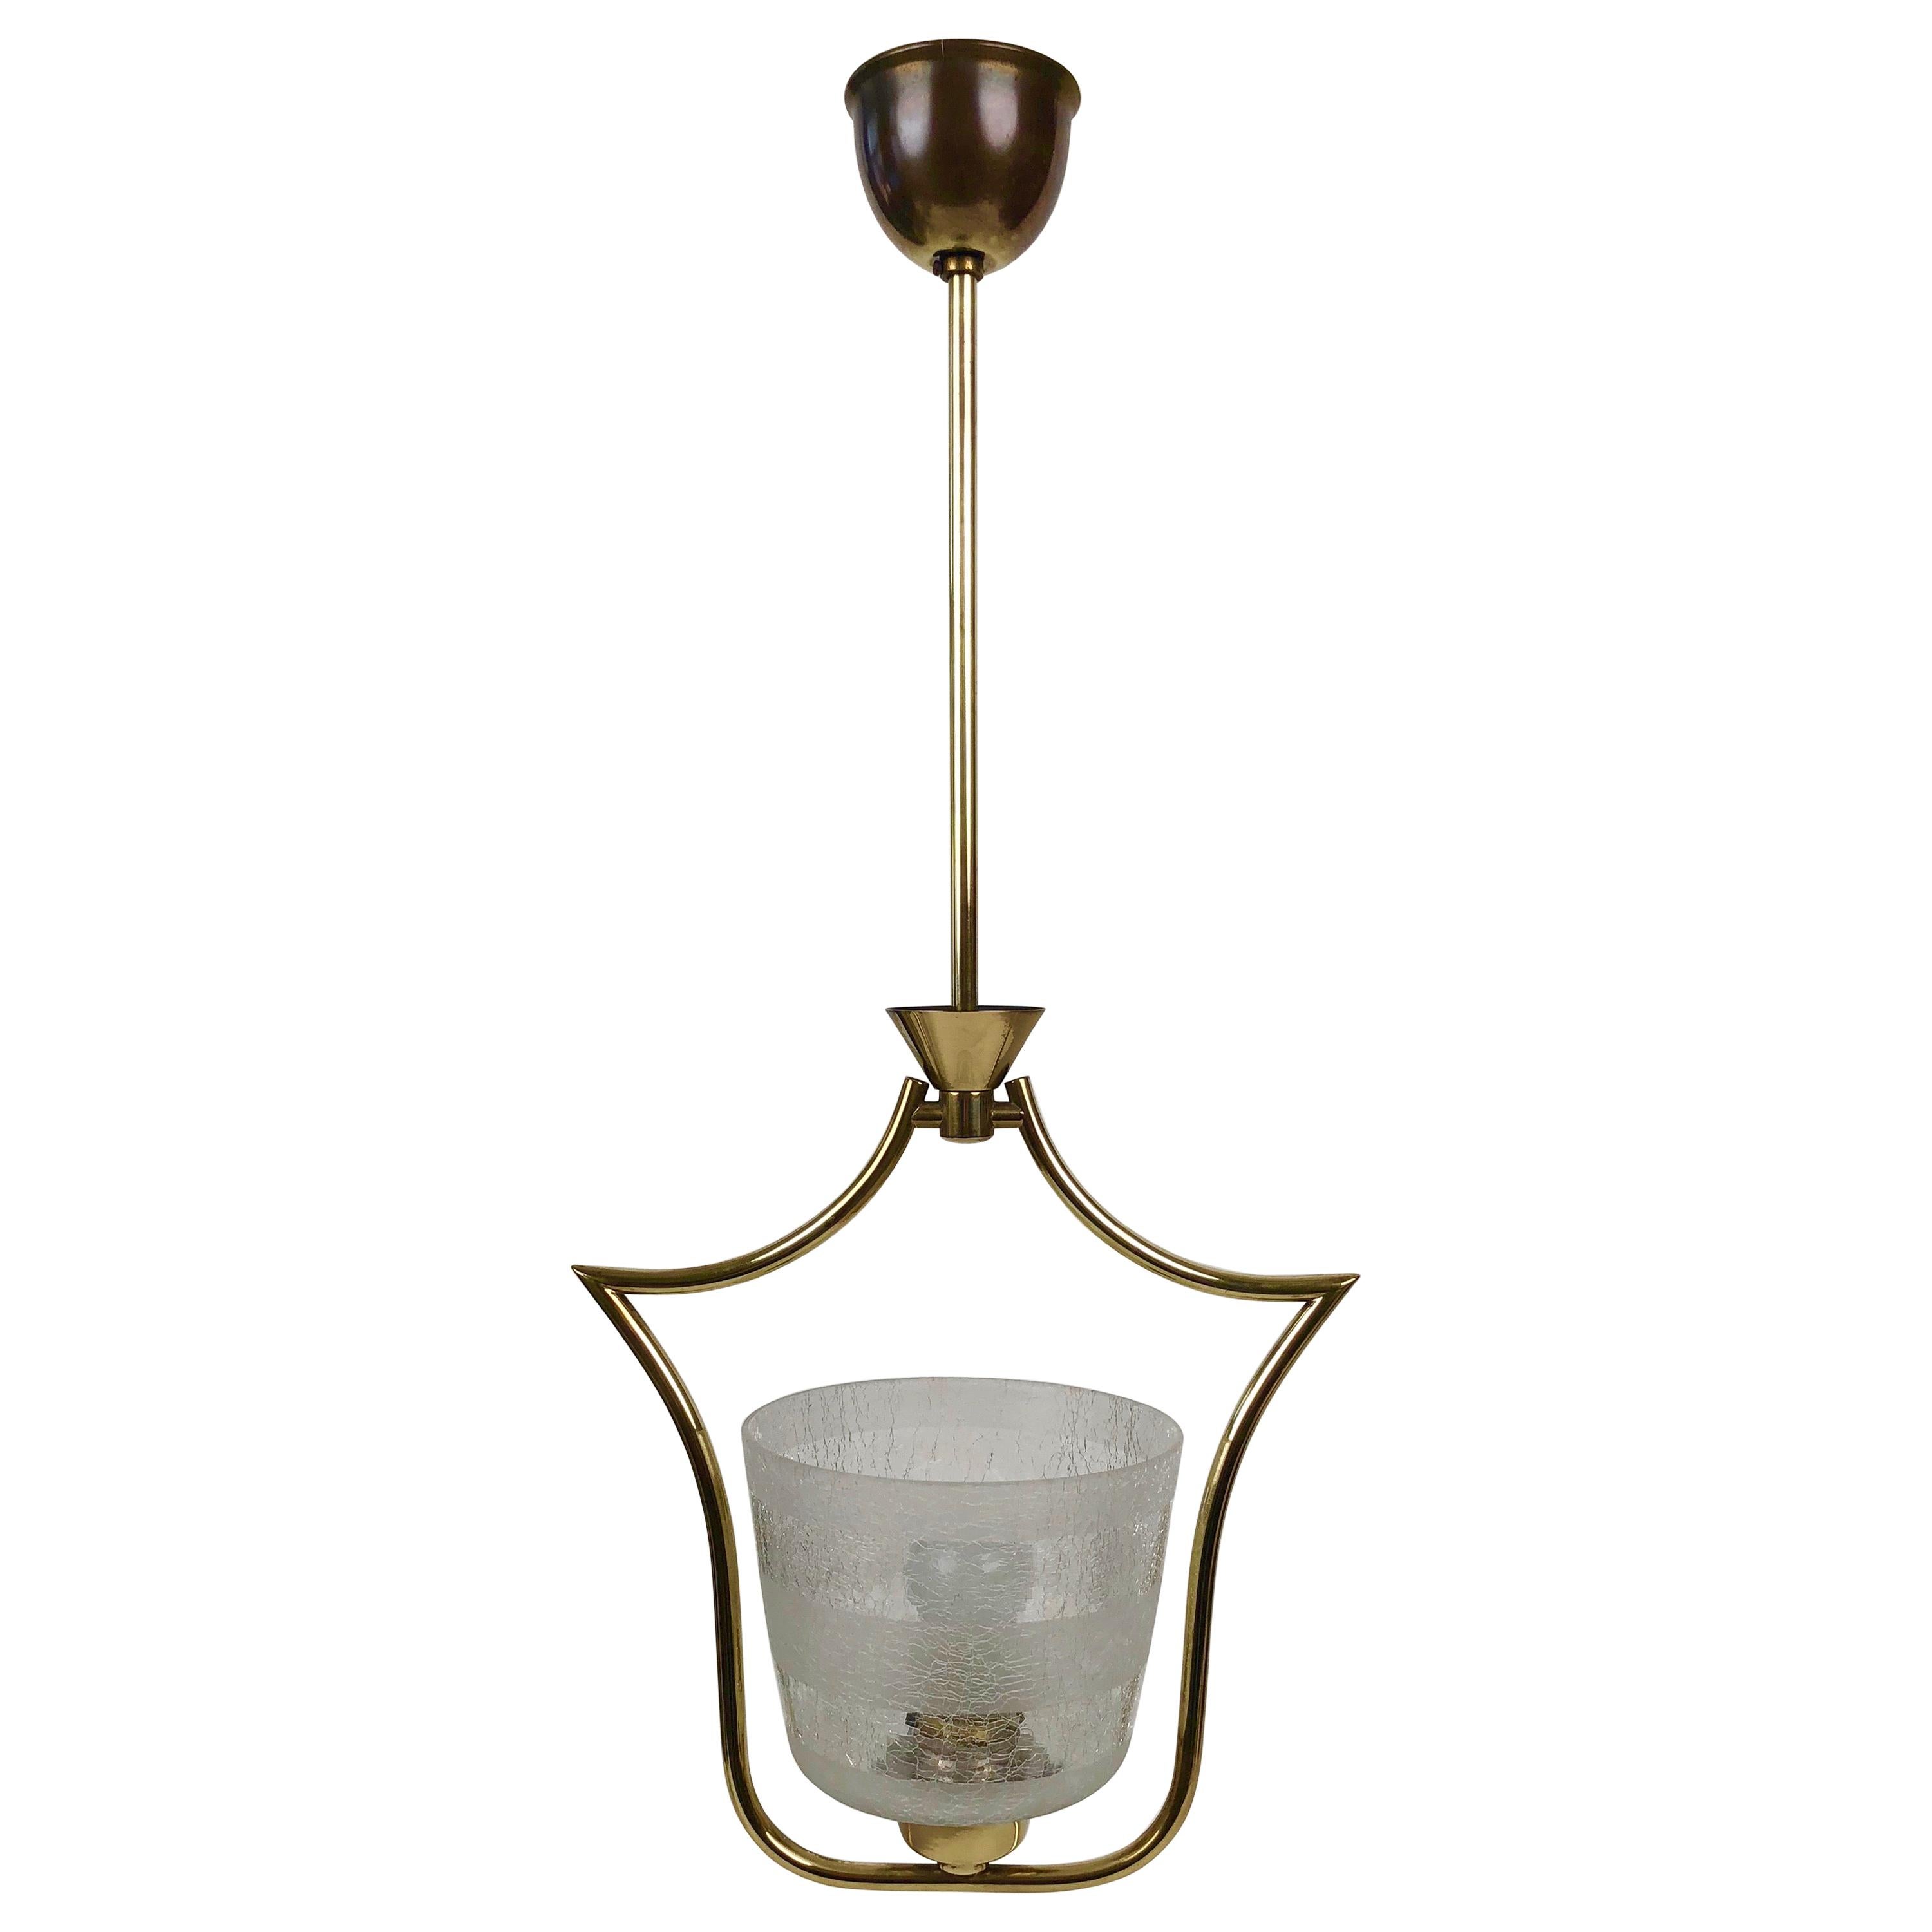 Hollywood Regency Styled Pendant Lamp in Brass and Glass, from Austria, 1950s